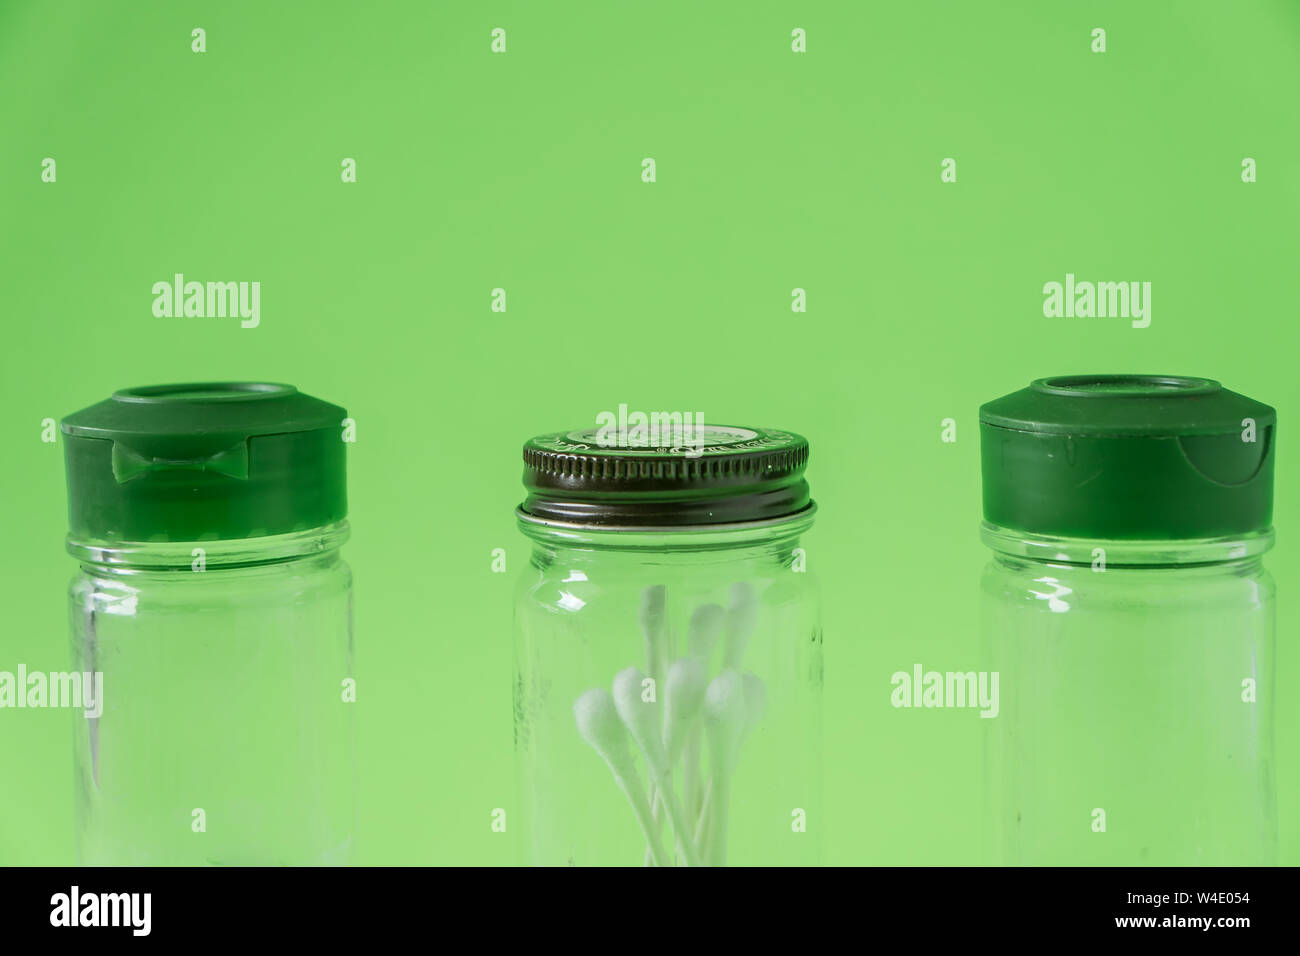 3 Glass spice jars on lime green background with blank empty room space for text or copy. Three kitchen bottles recycled and reused to store cotton sw Stock Photo